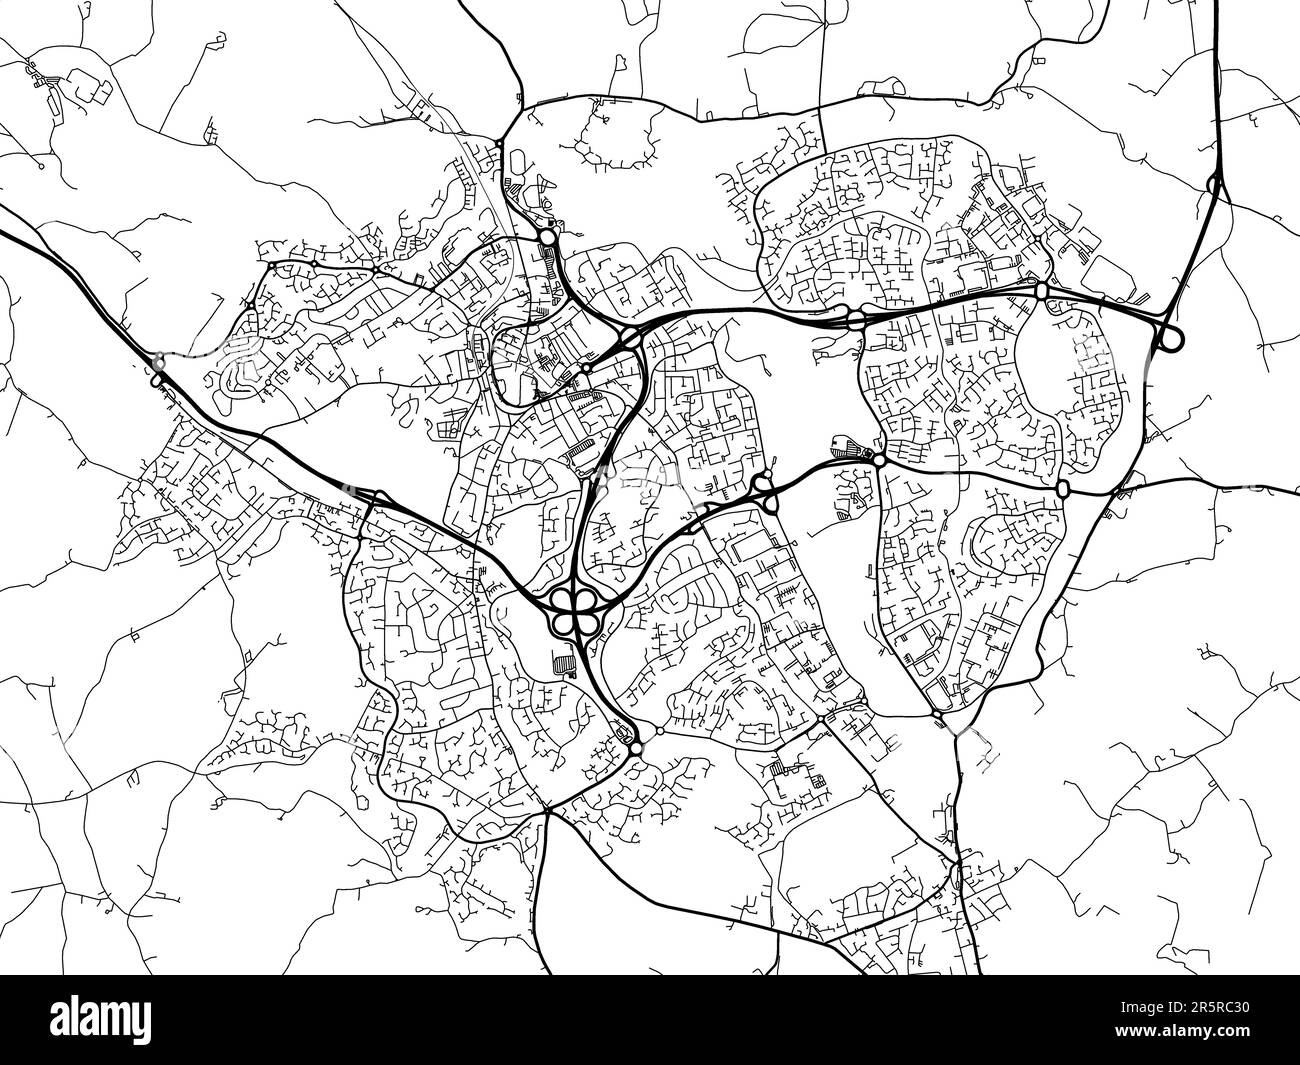 Road map of the city of  Redditch in the United Kingdom on a white background. Stock Photo